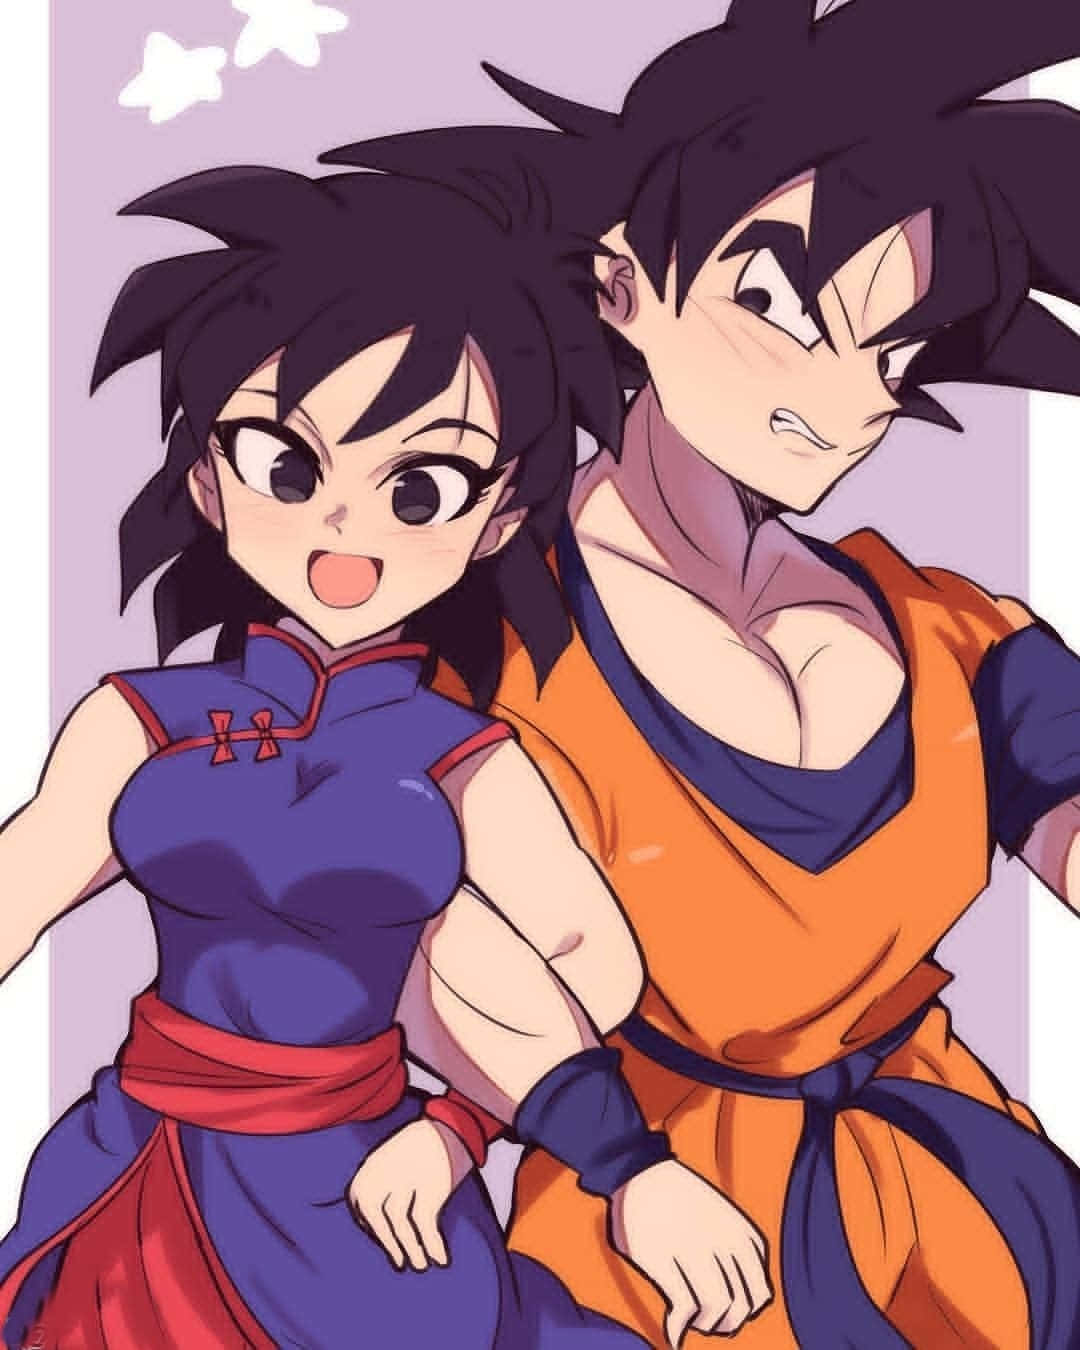 Goku and Chichi, always fighting side by side. Wallpaper